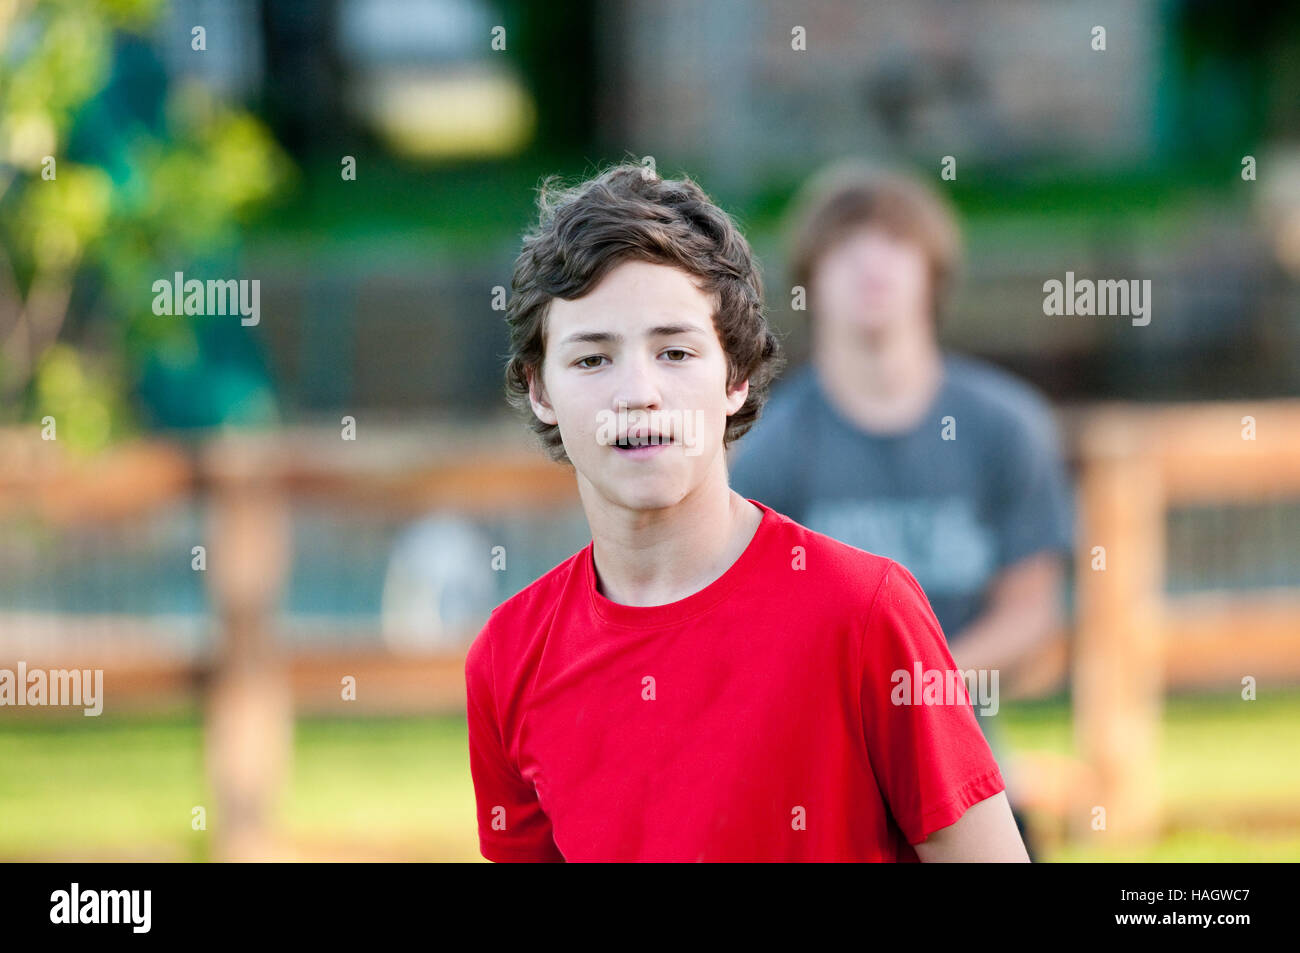 Teenage boy close-up in backyard with expression on face. Stock Photo